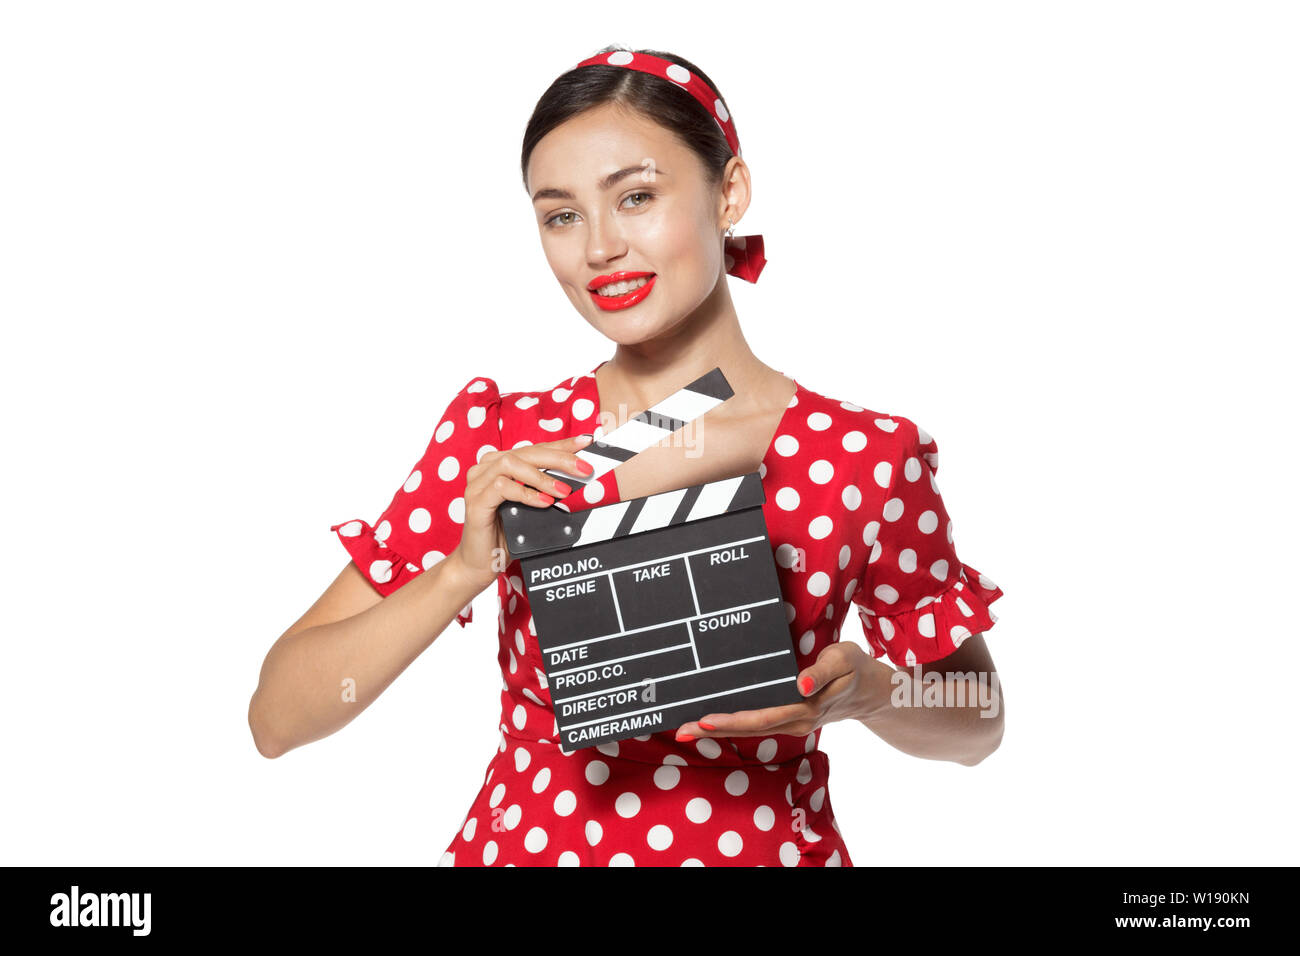 Woman with movie clapper board. Young retro pin-up girl Stock Photo